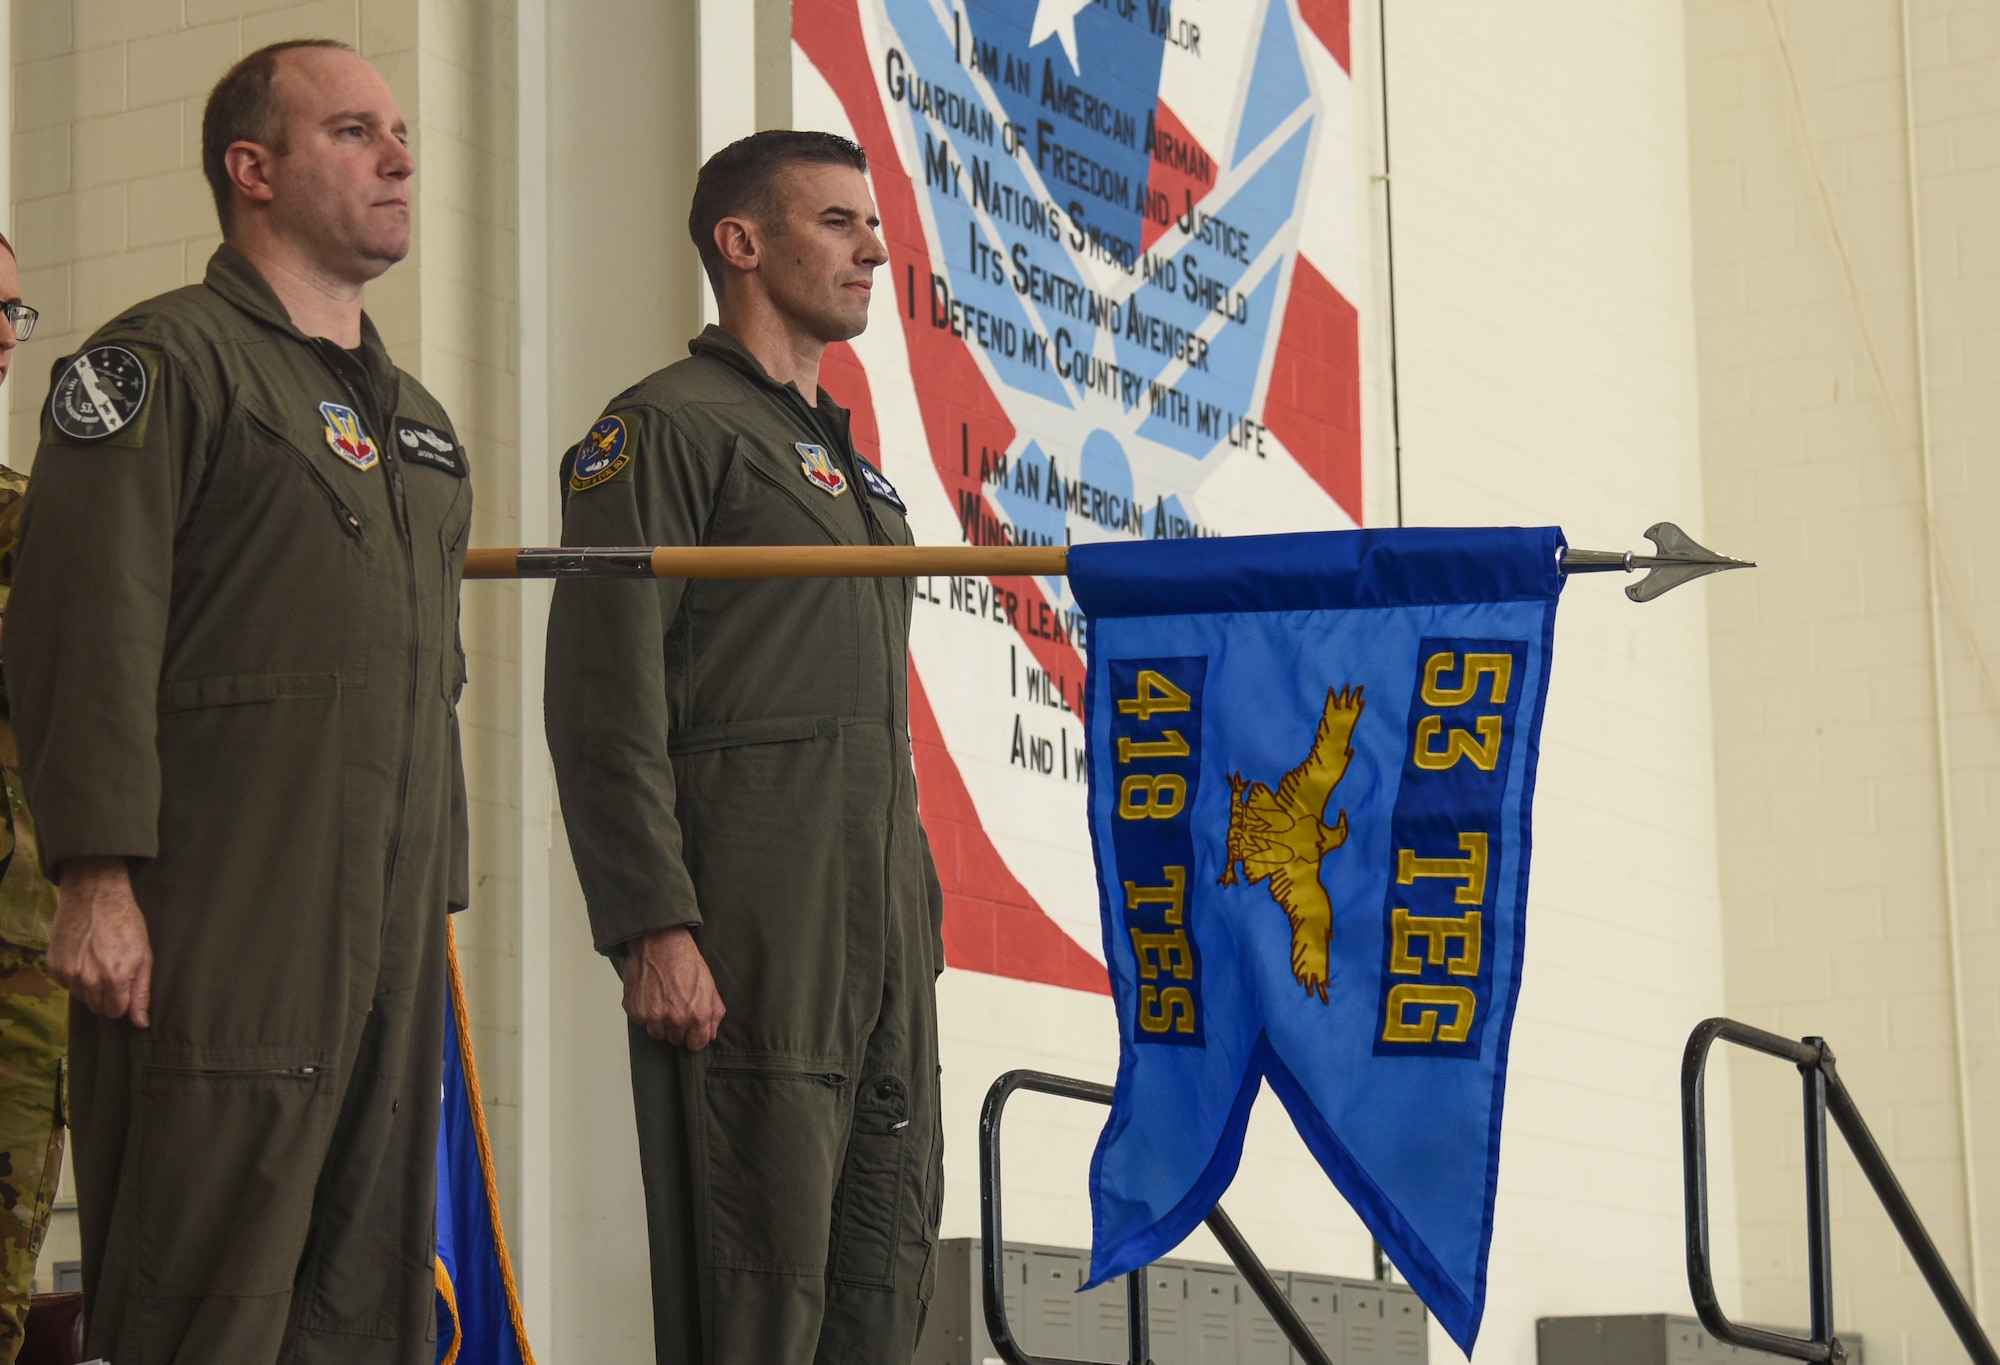 Pictured above are two Airmen standing at attention with a flag in between them.